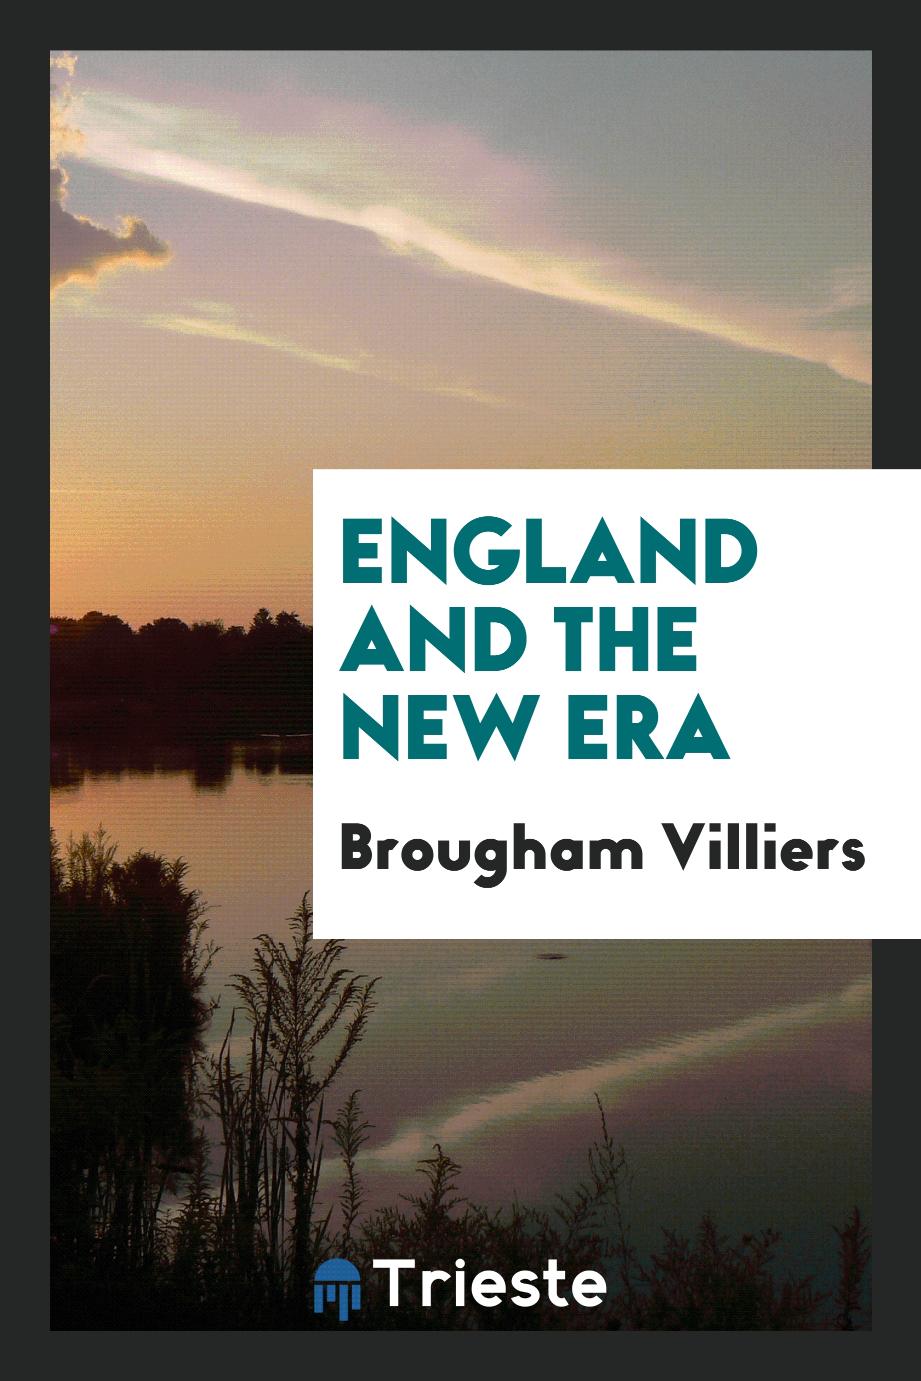 England and the new era